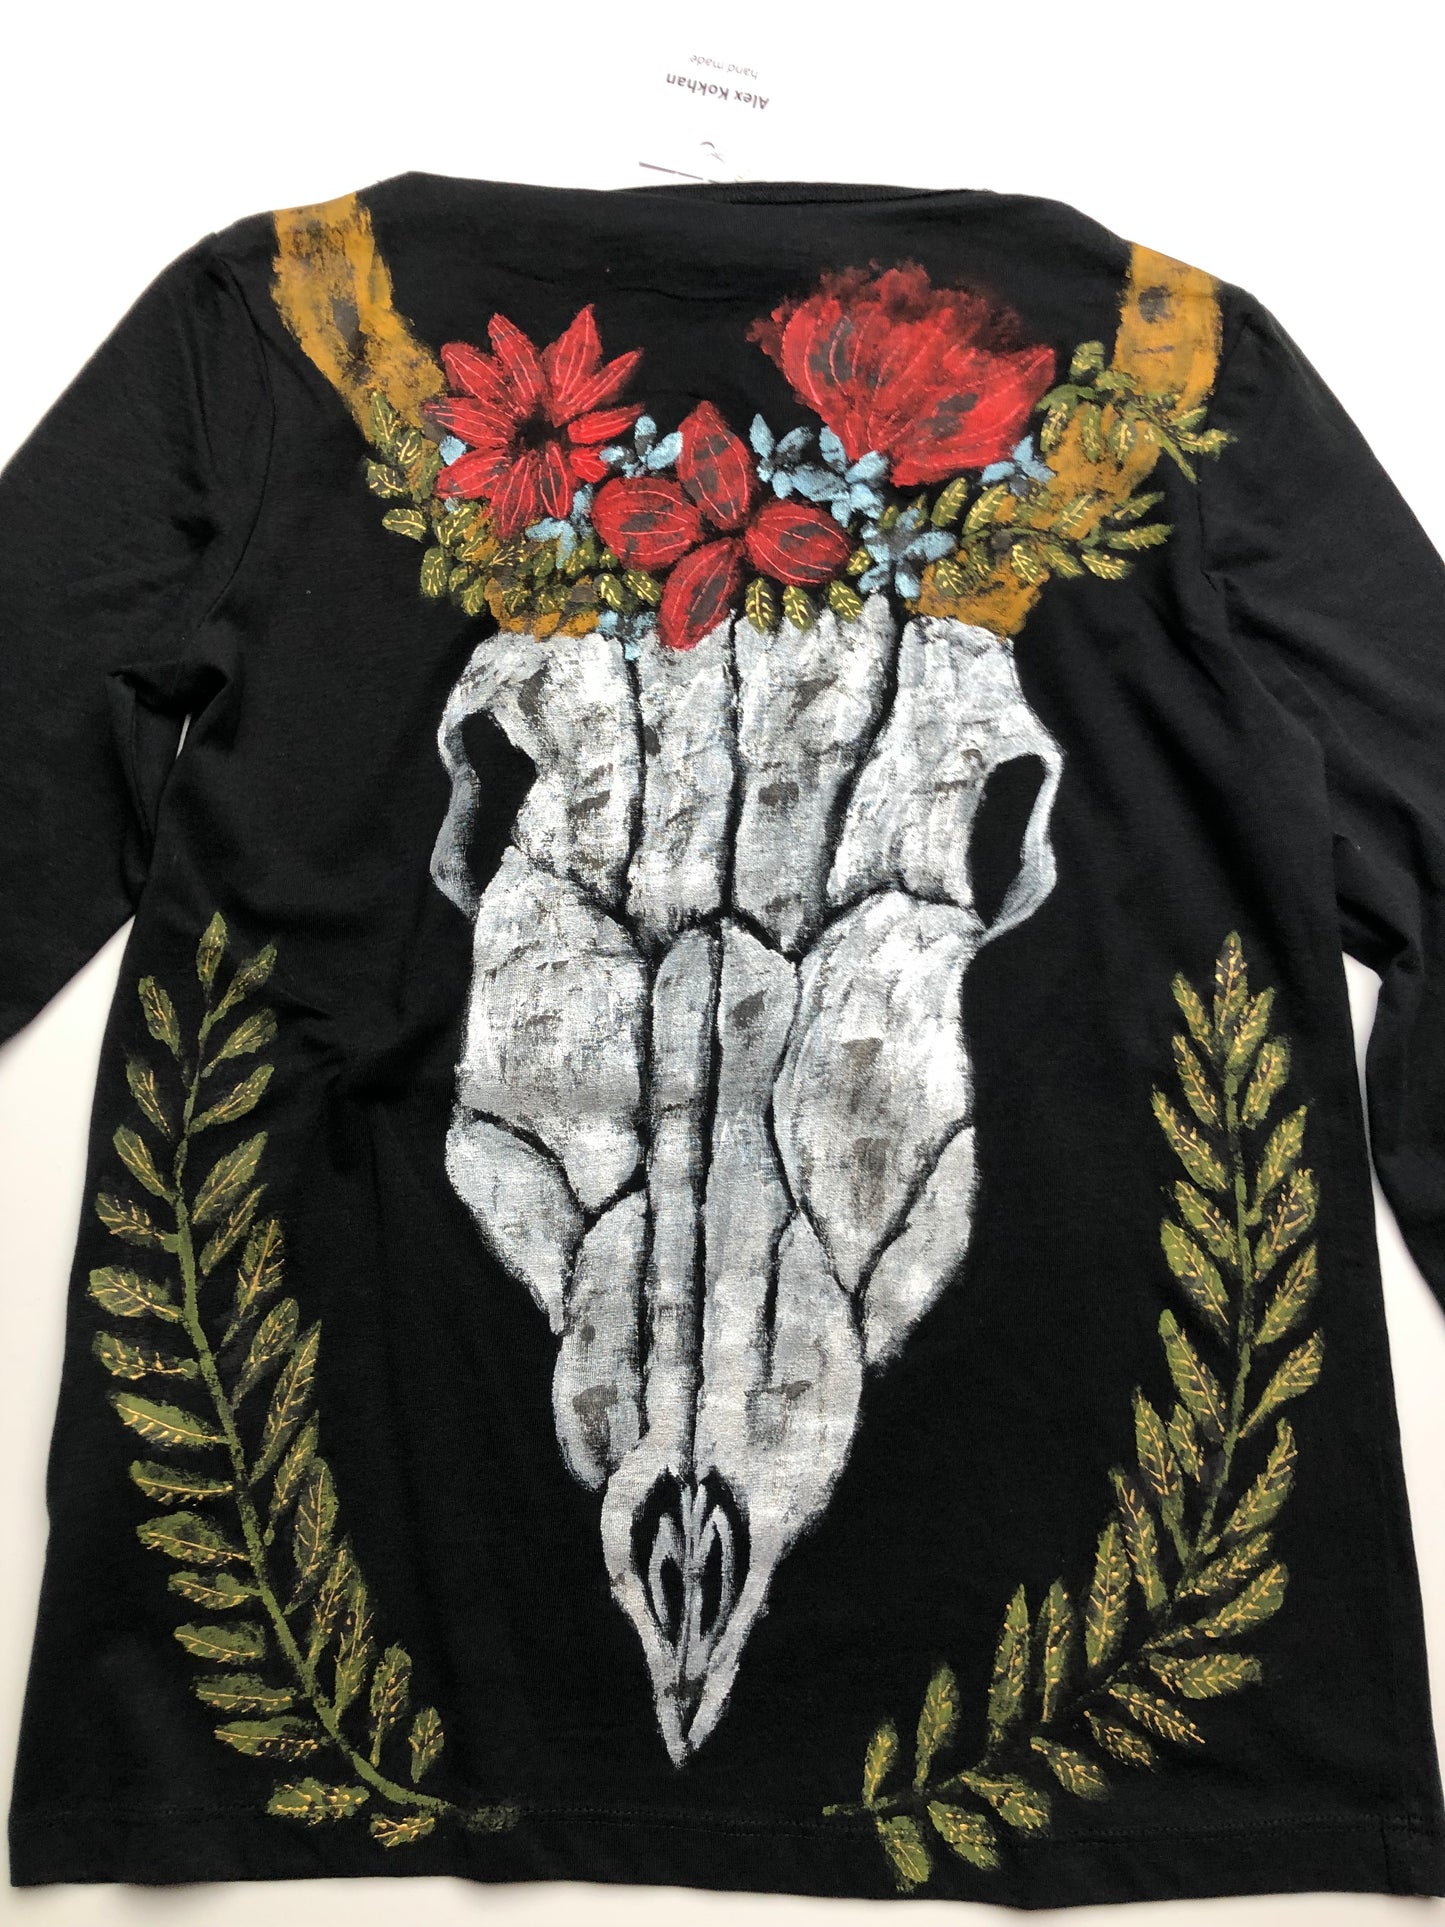 Luxury Women's long sleeve black T-shirt with a pattern of a skull, horns, leaves and flowers. Skull Blouse for Ladies